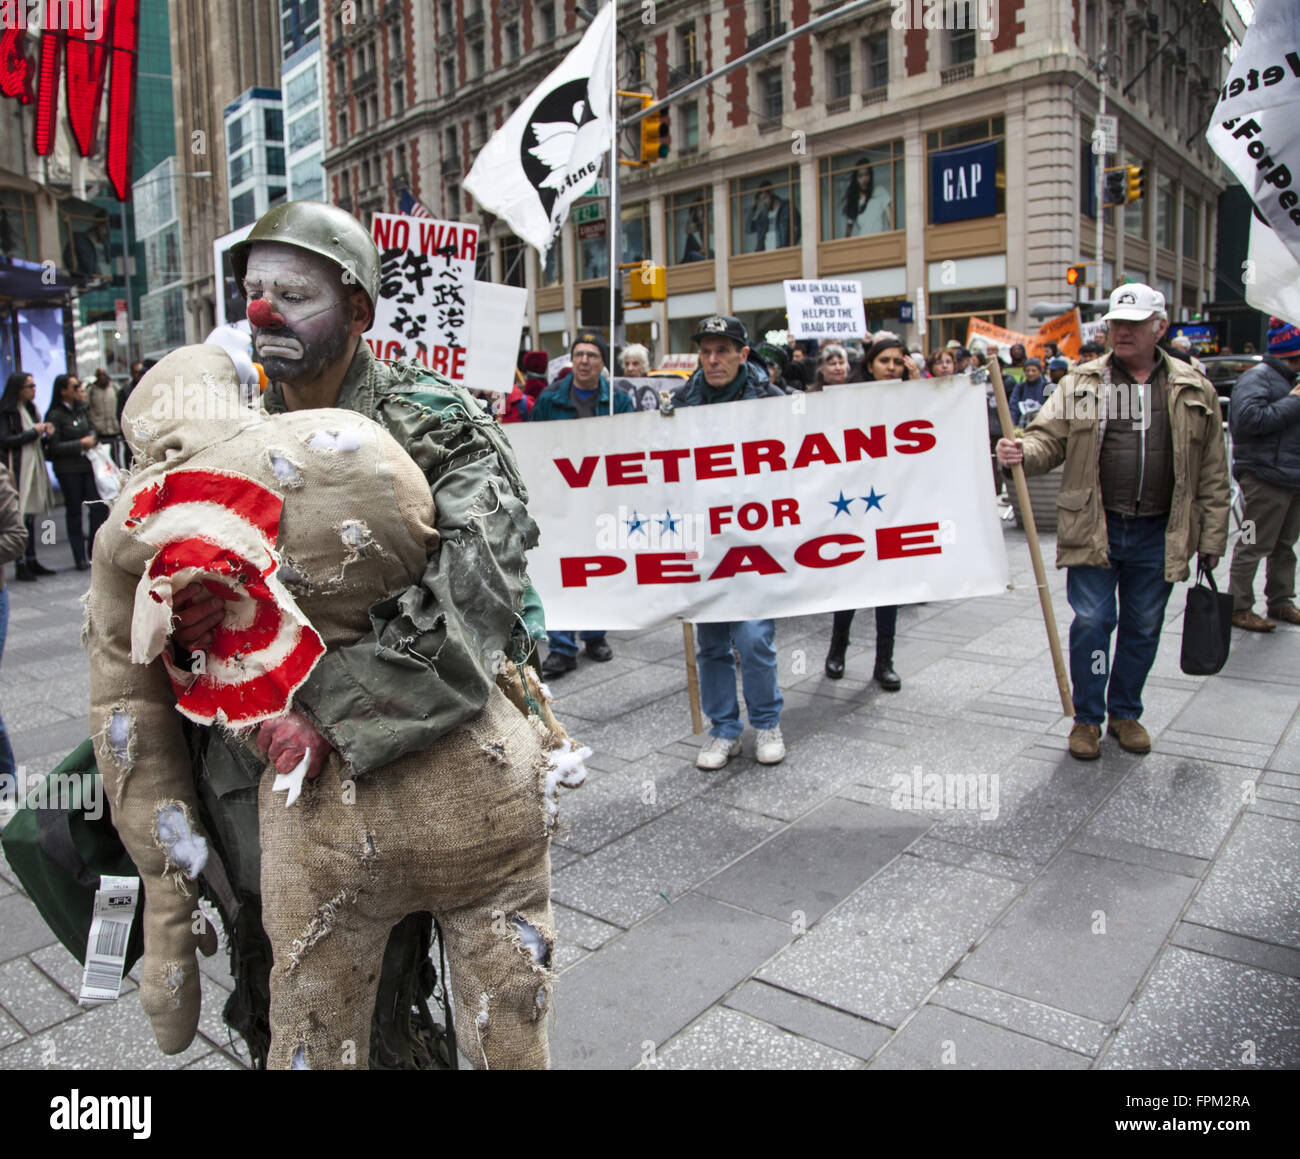 New York, USA. 19th Mar, 2016. Coalition of activist groups march and have a silent vigil bringing attention to the out of control destructiveness of U.S. militarism accomplishing nothing positive and displacing whole societies as in Iraq & Syria. Credit:  David Grossman/Alamy Live News Stock Photo